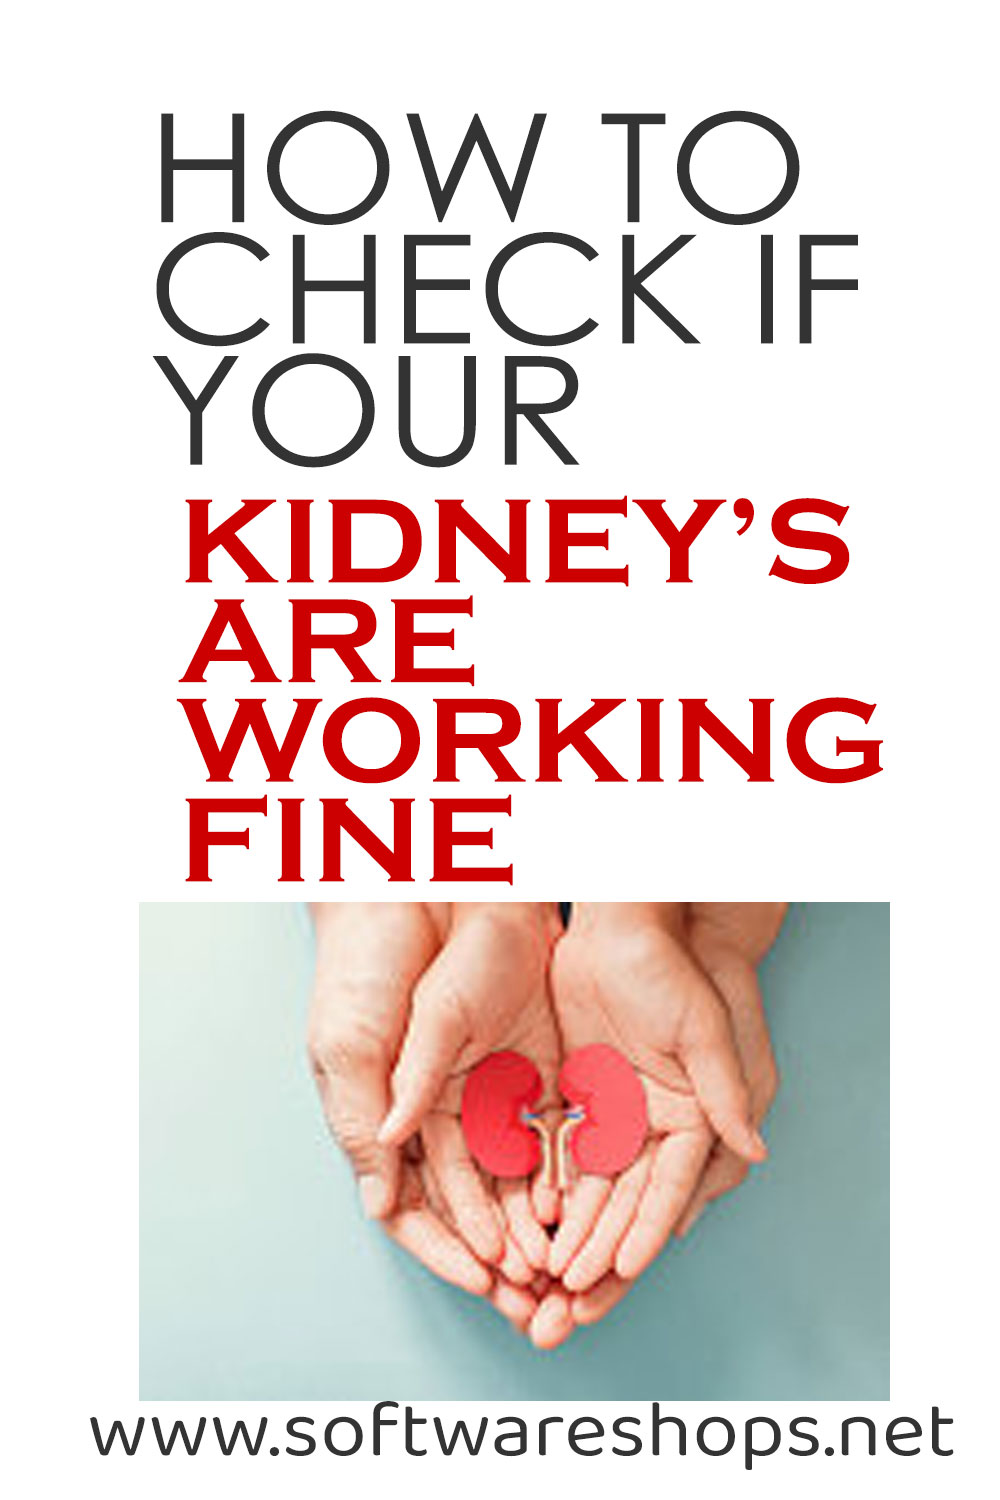 HOW TO CHECK IF YOUR KIDNEYS ARE WORKING FINE